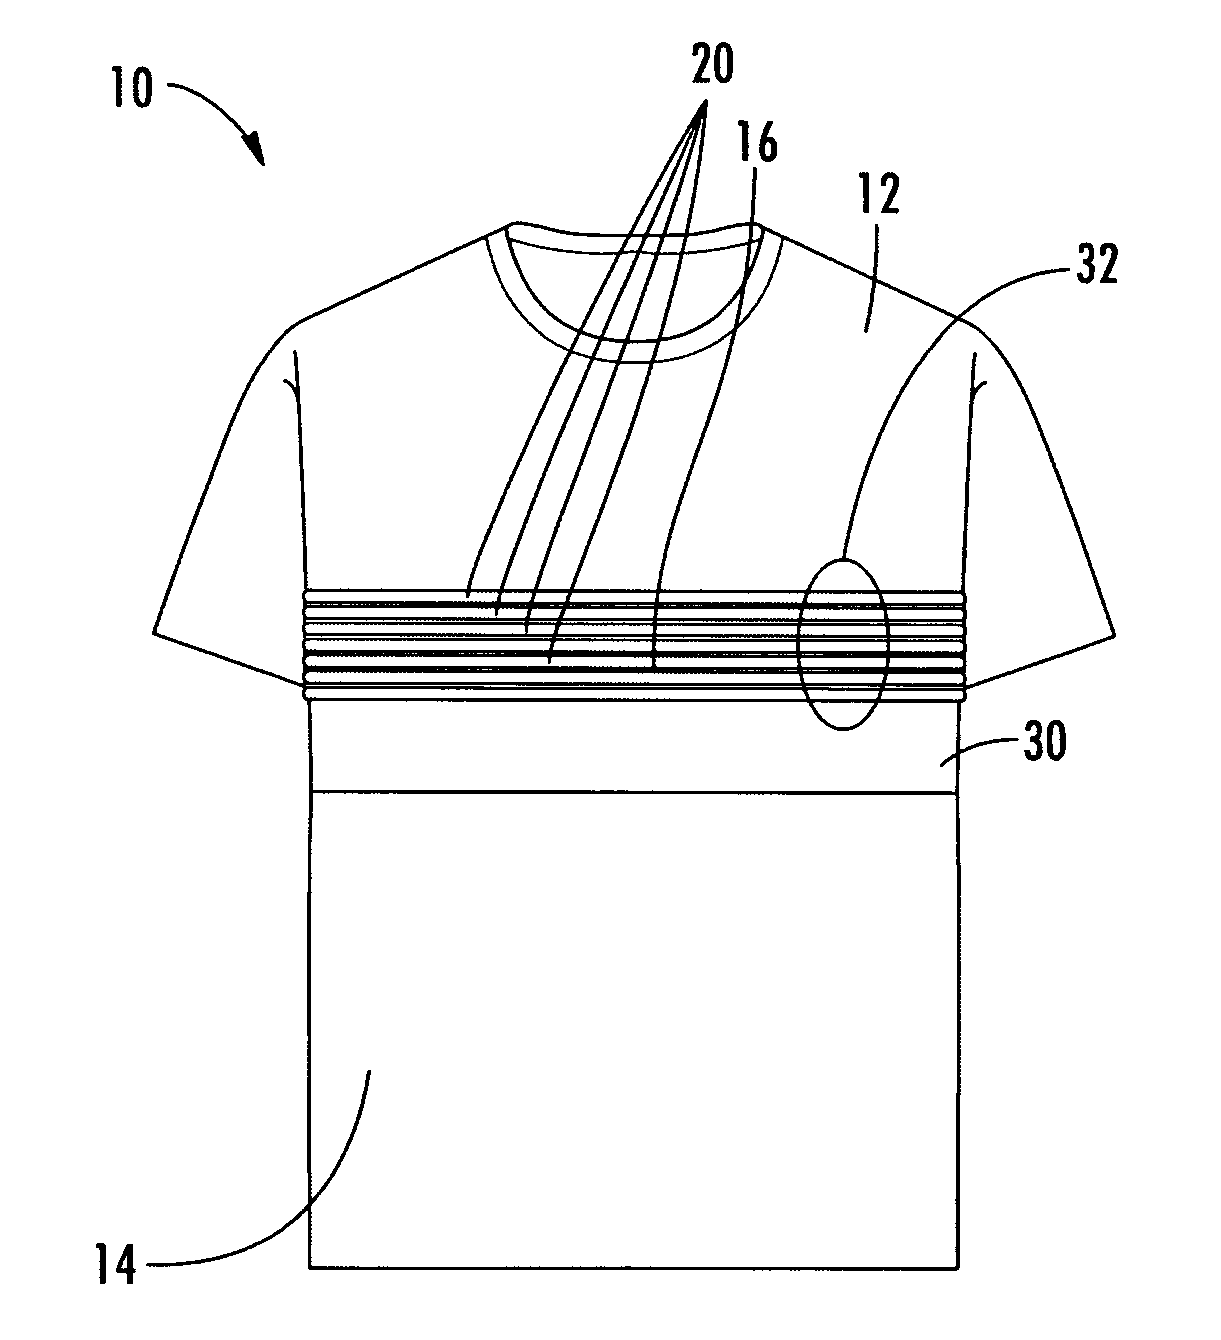 Physiological monitoring garment